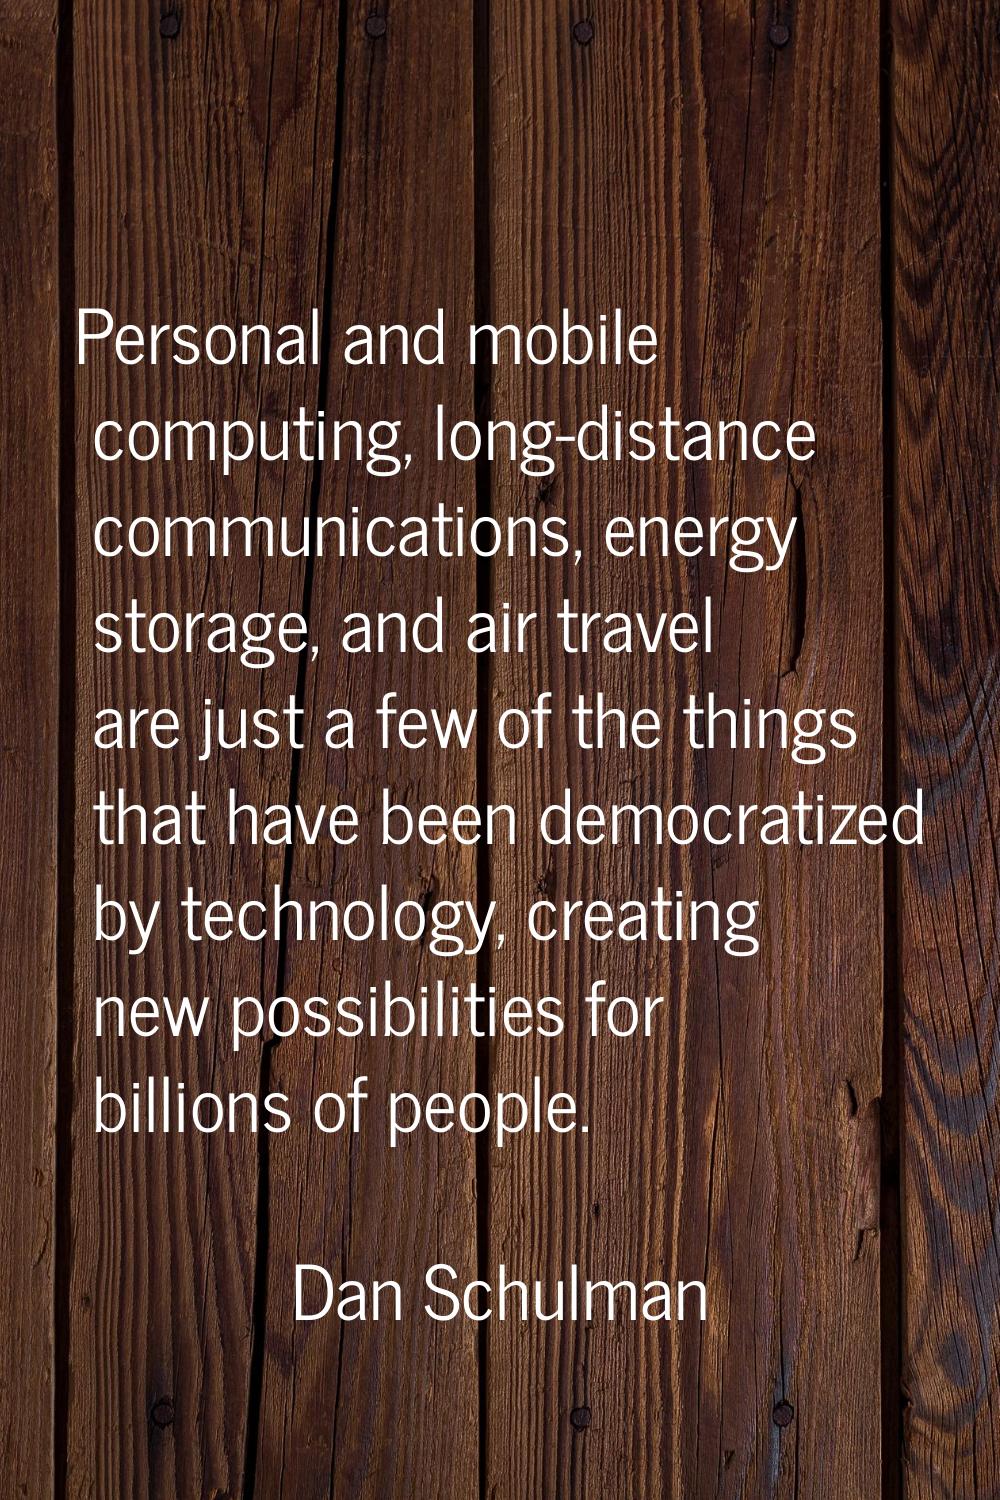 Personal and mobile computing, long-distance communications, energy storage, and air travel are jus